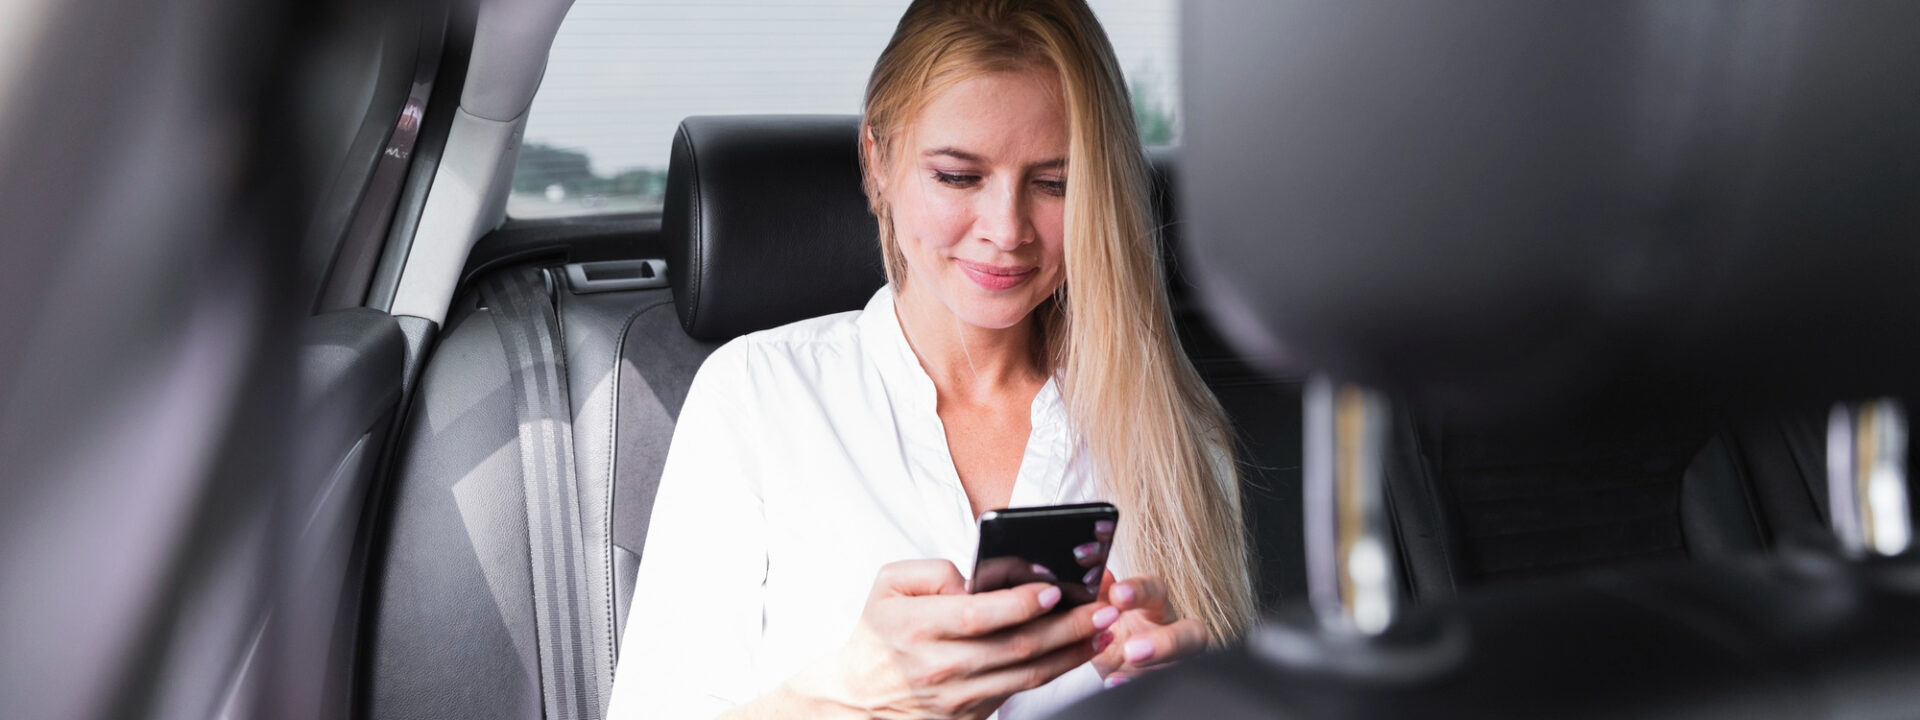 woman-with-phone-car-back-seat